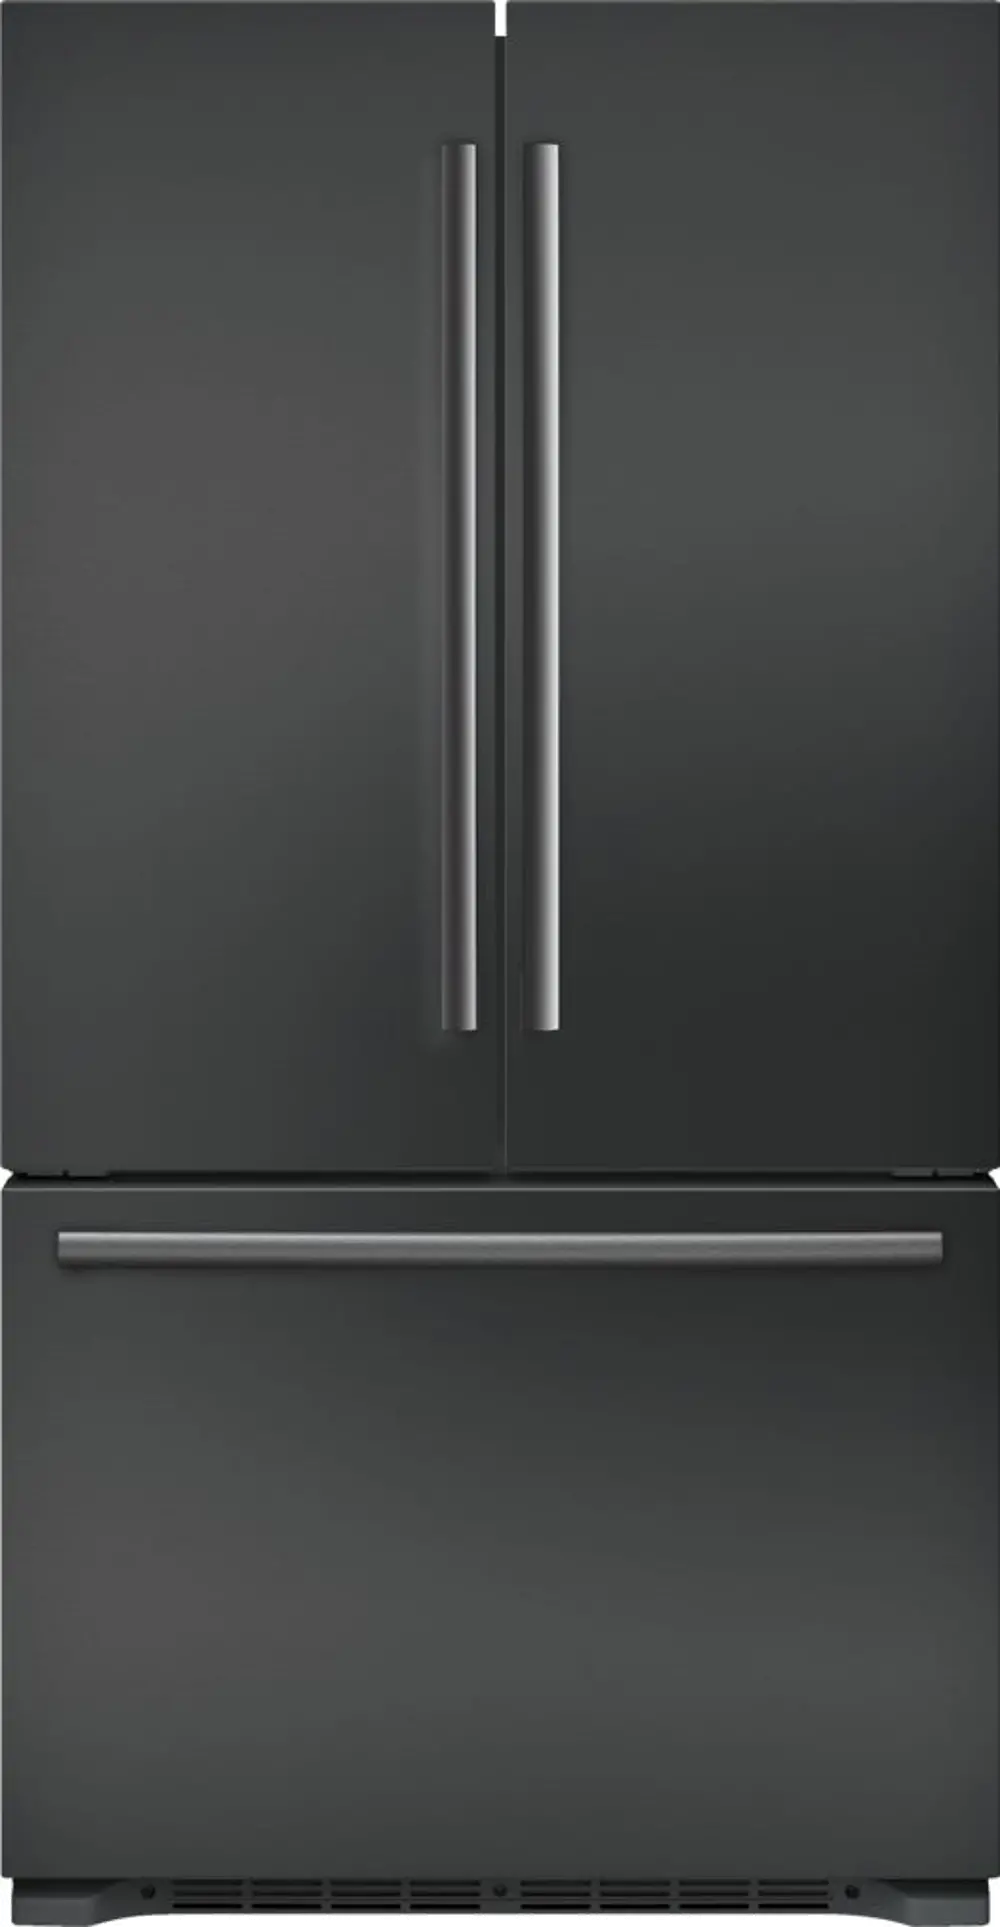 B21CT80SNB Bosch Counter Depth French Door Refrigerator - 20.7 cu. ft., 36 Inch Black Stainless Steel-1